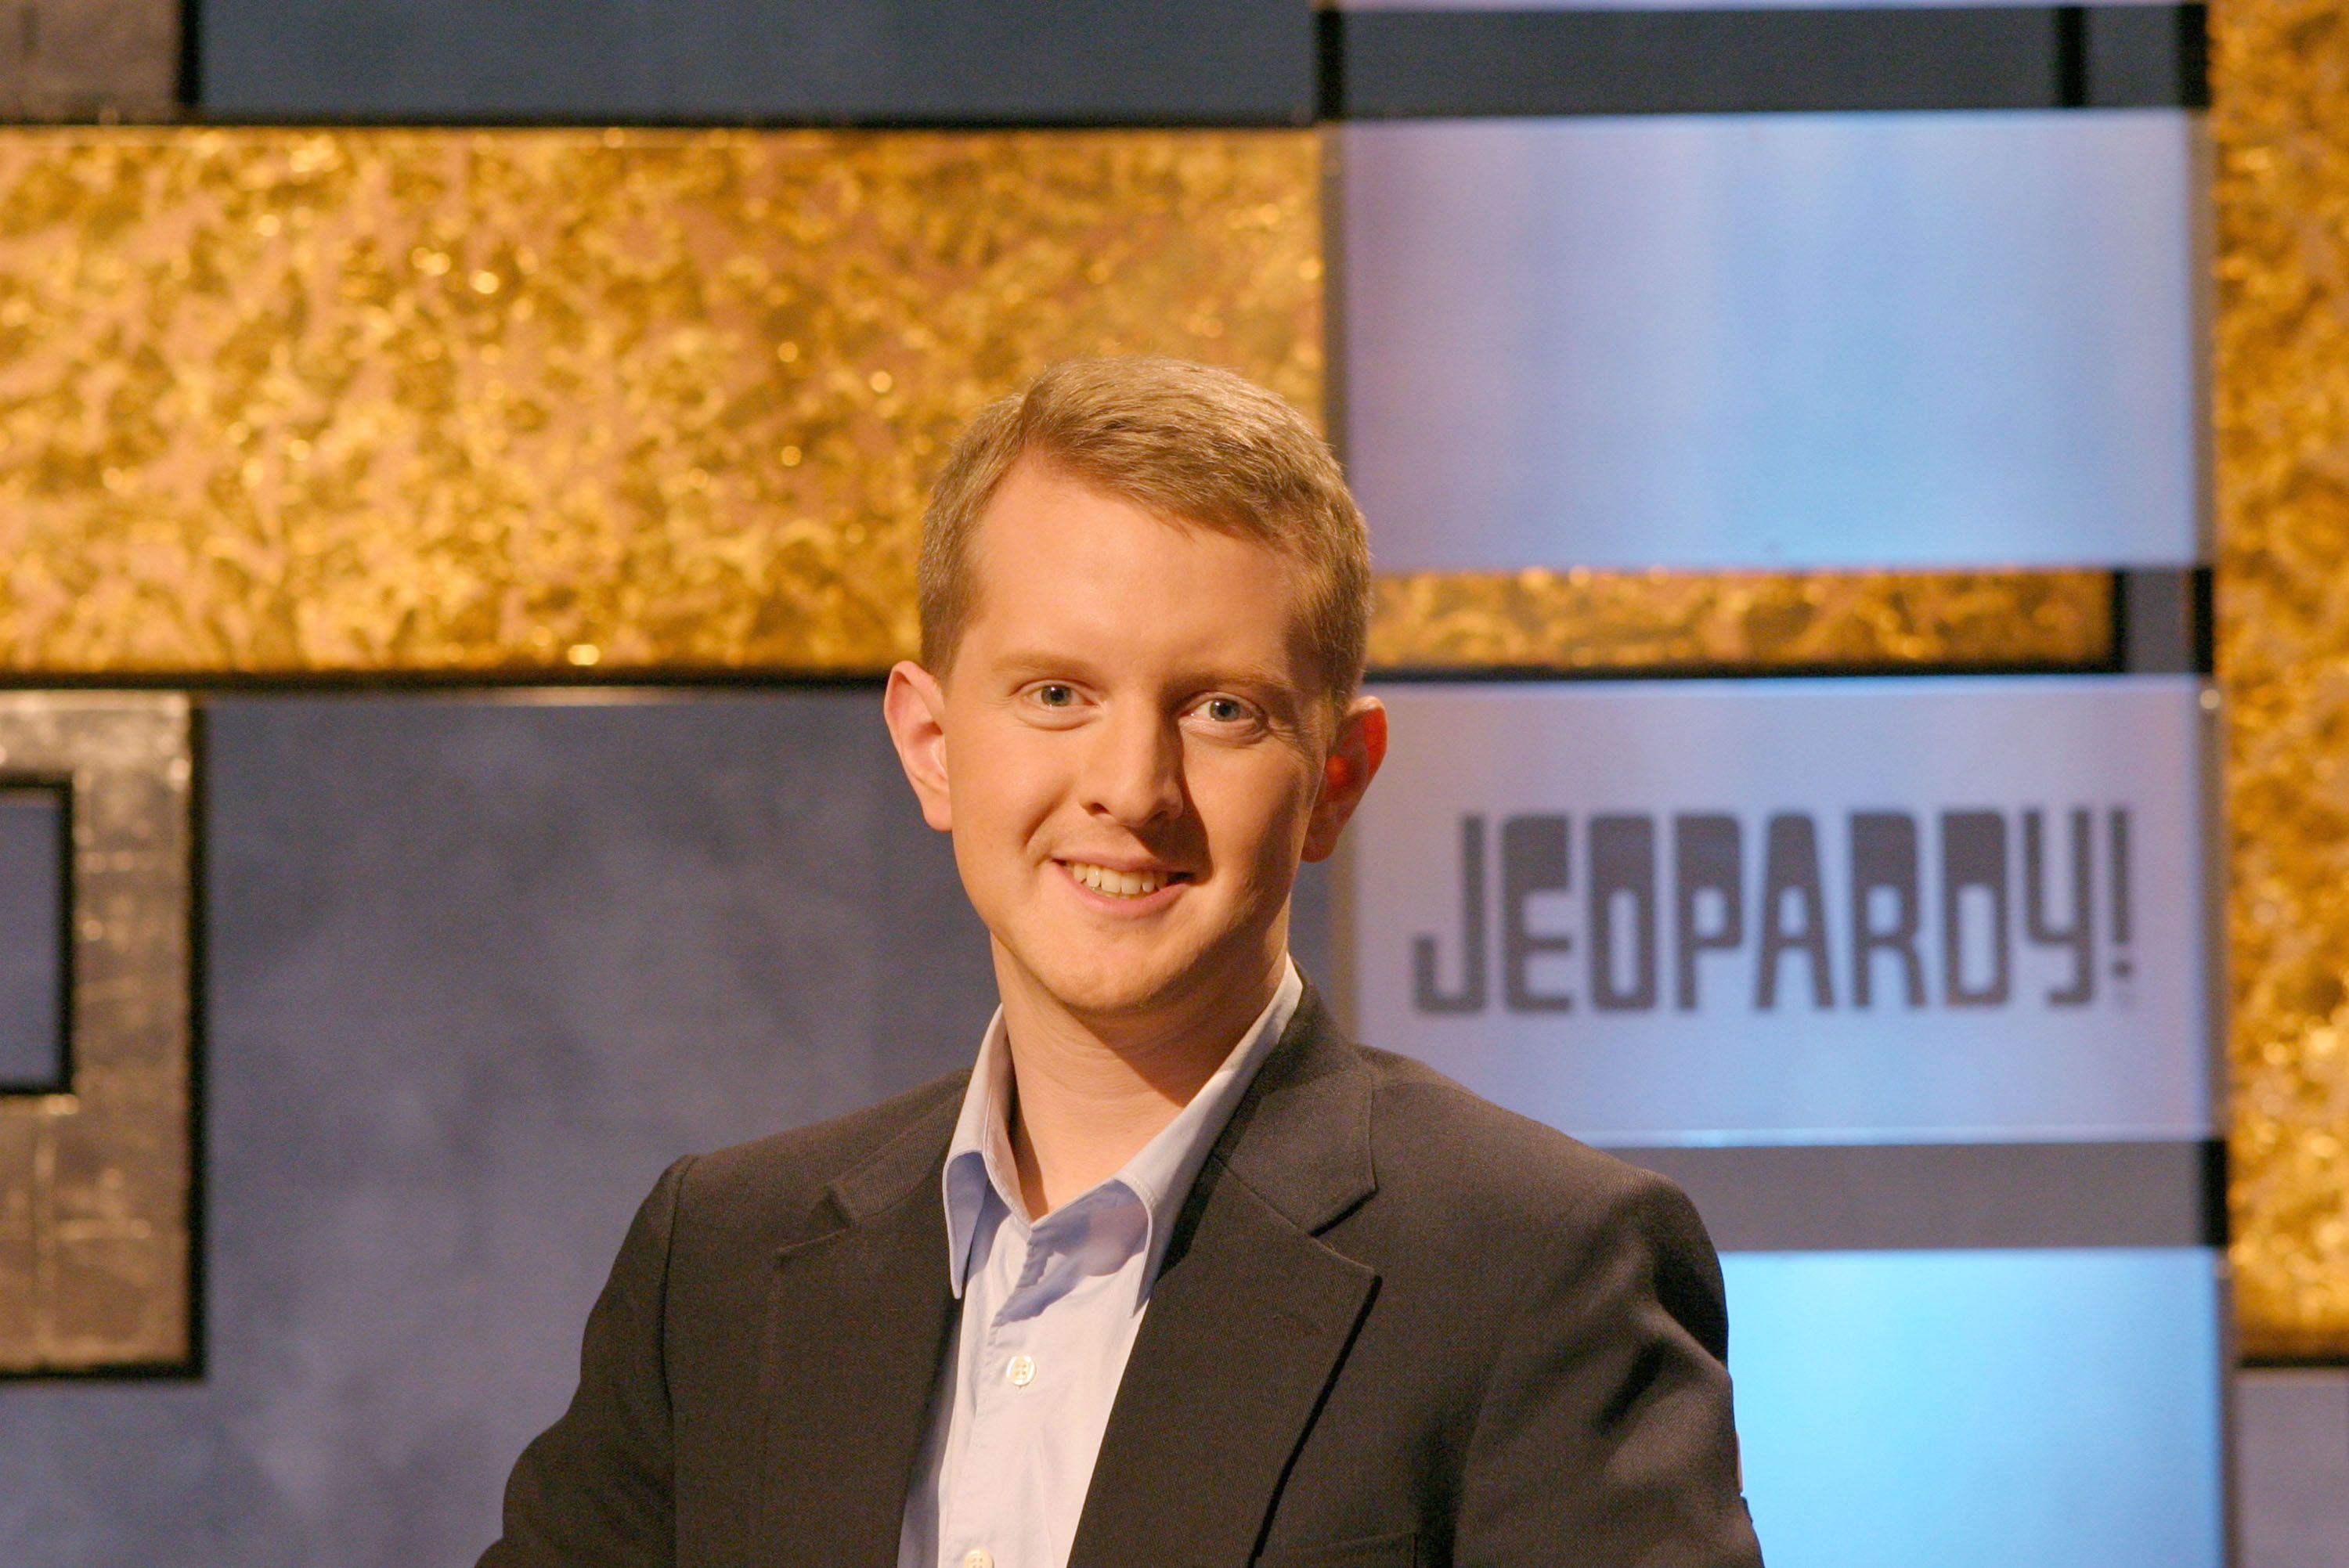 Ken Jennings poses in this undated handout photo on the set of "Jeopardy!" on an episode broadcast on November 30, 2004 | Photo: Jeopardy Productions/Getty Images